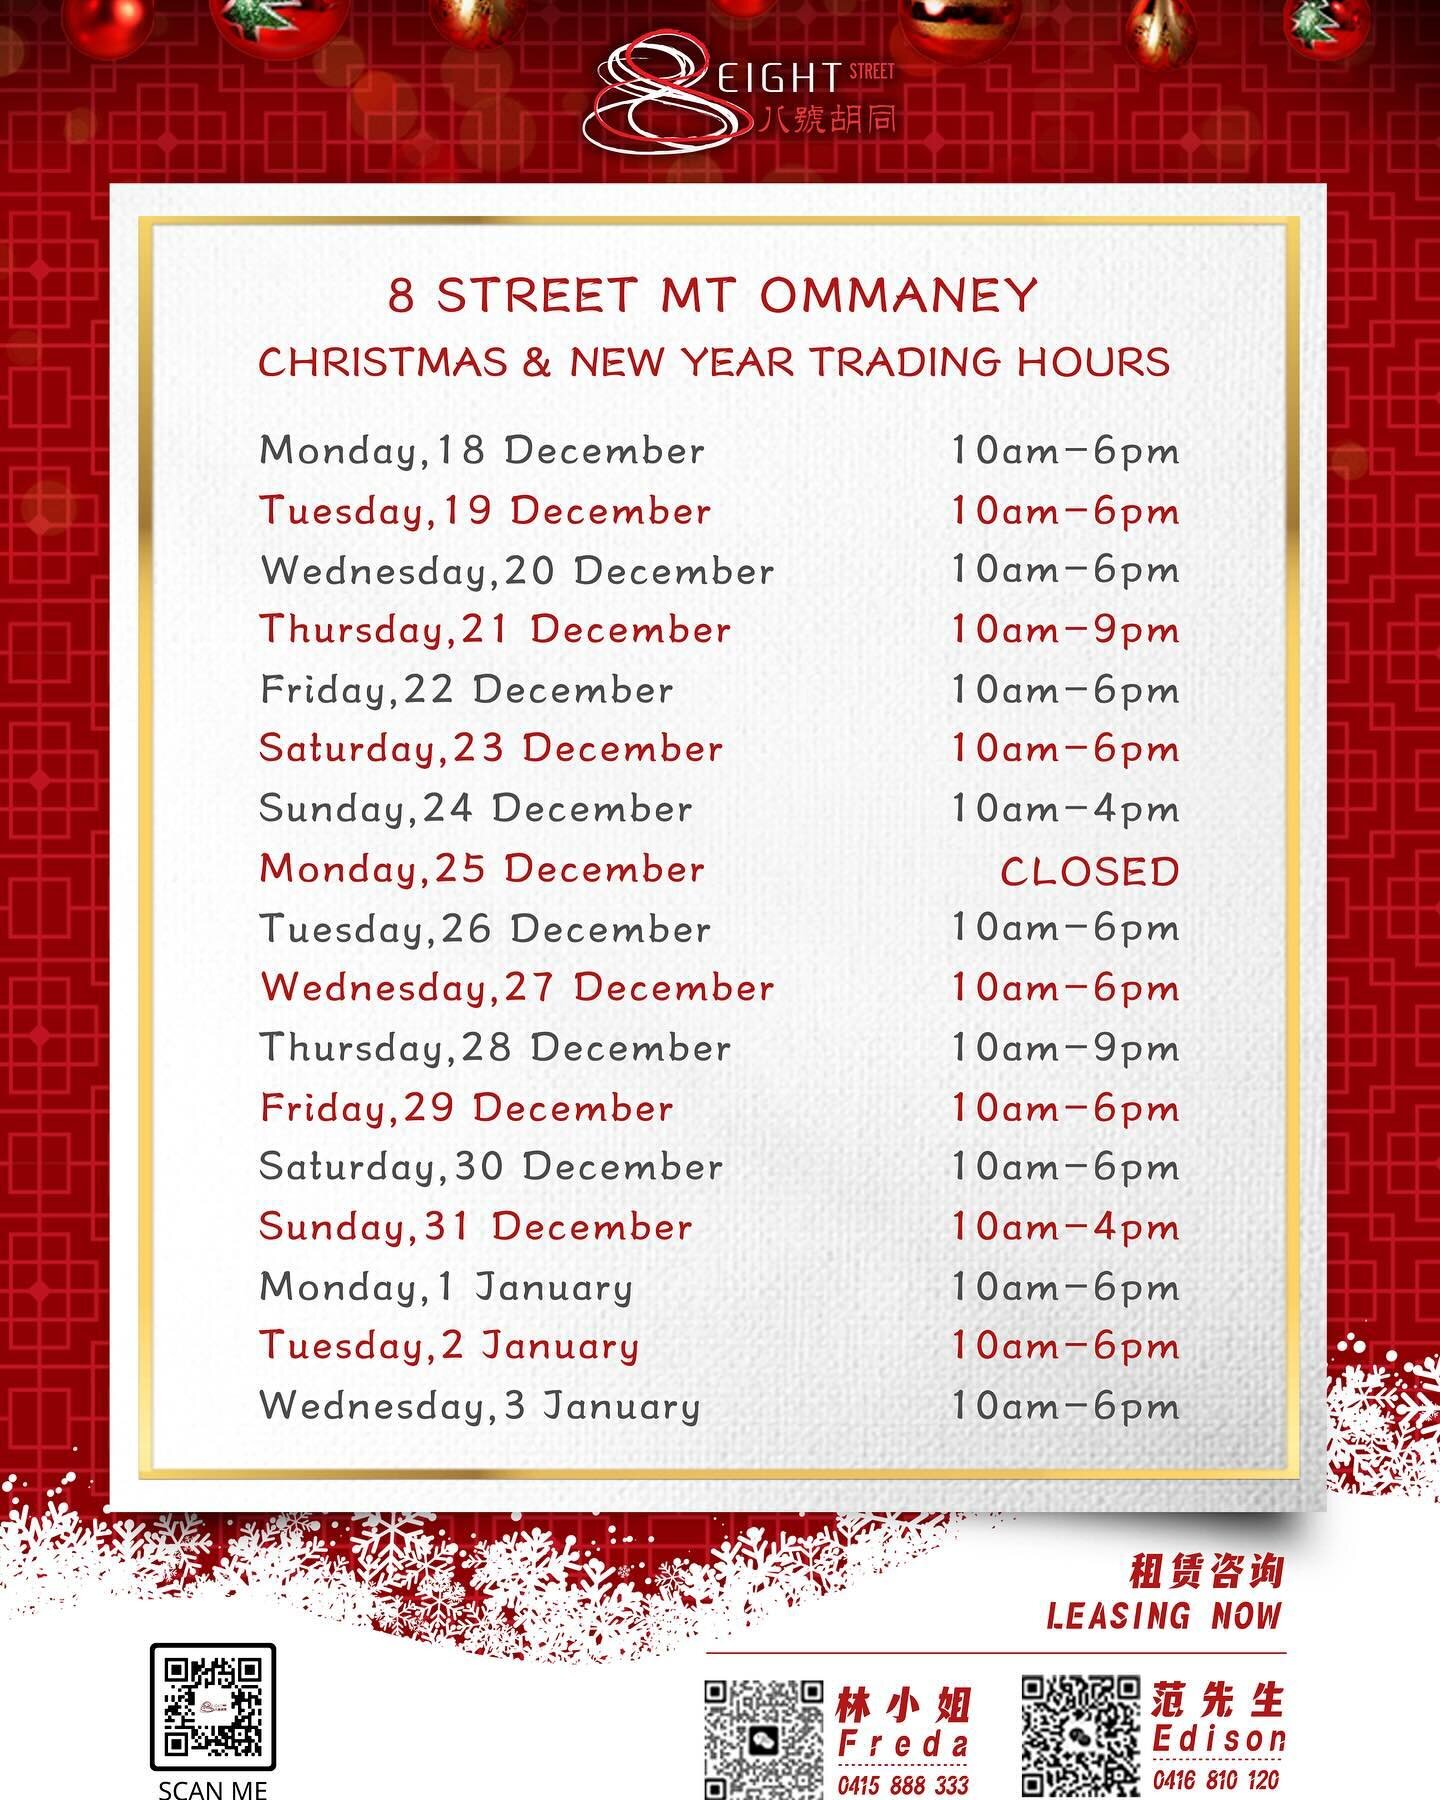 Please check out our 3 stores new trading hours for Christmas &amp; New year ~😝